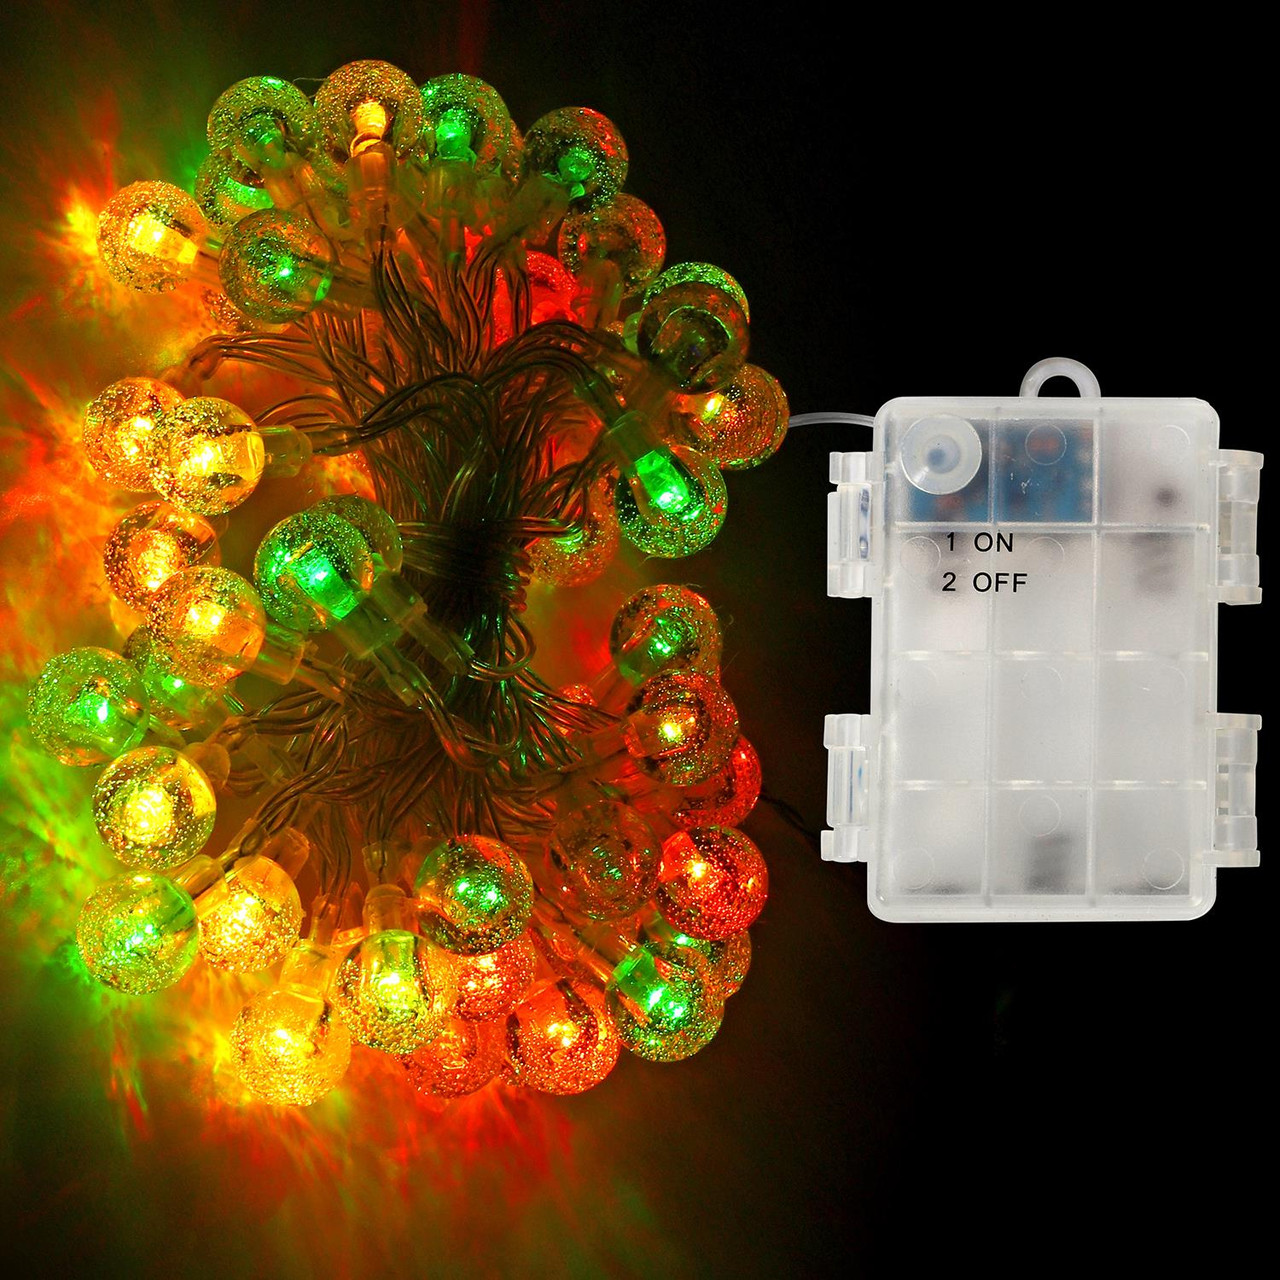 Vinsani Globe Fairy String Lights 26ft 60LED Battery Operated 7  Multicoloured Glow Waterproof Indoor Outdoor Christmas Decoration Bulb  Lighting for Bedroom Patio Garden Party Home Wedding - Vinsani Ltd.